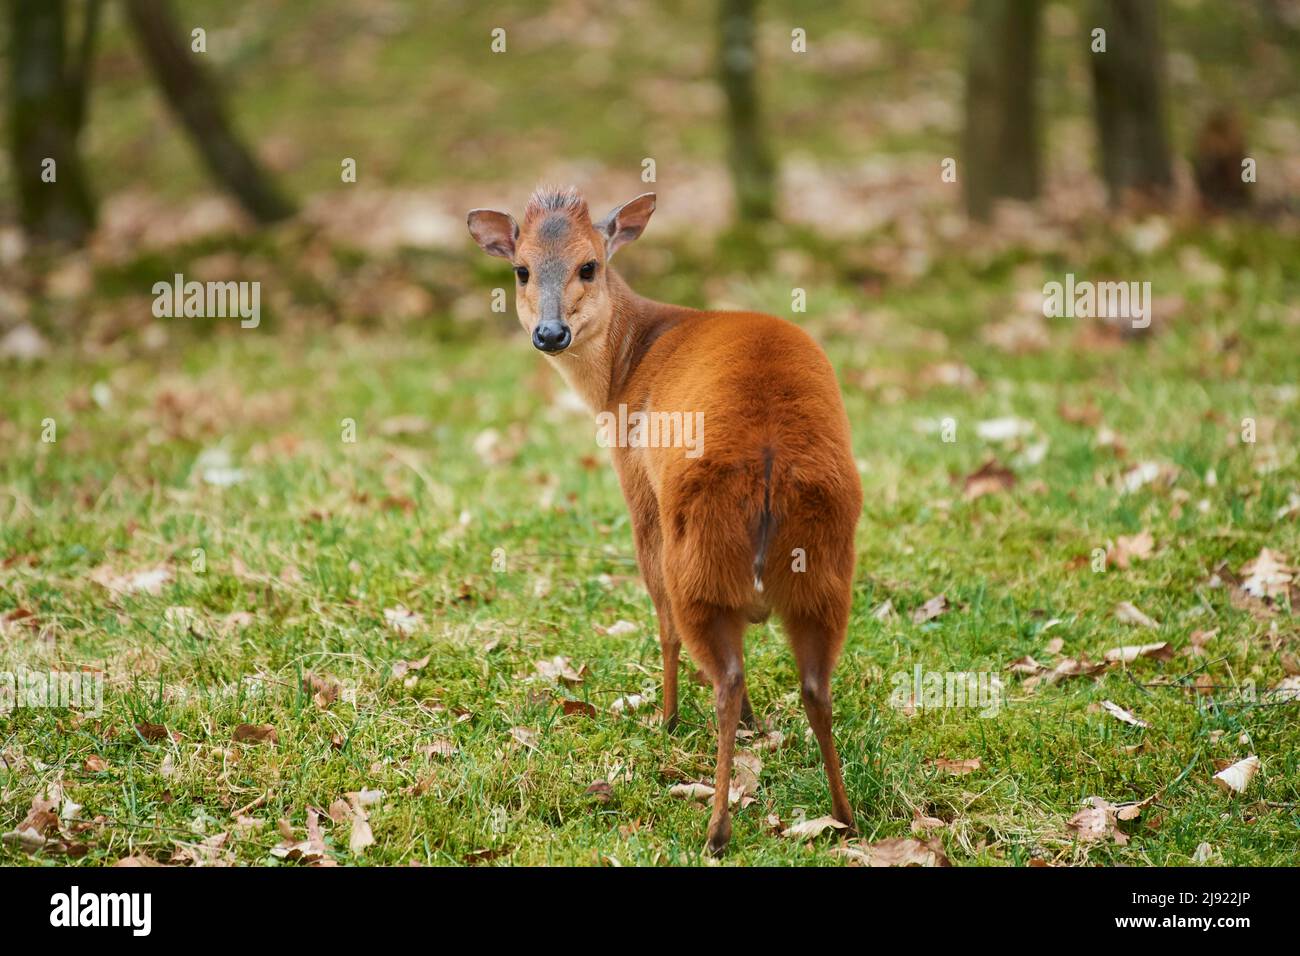 Red forest duiker (Cephalophus natalensis) on a meadow, Bavaria, Germany Stock Photo